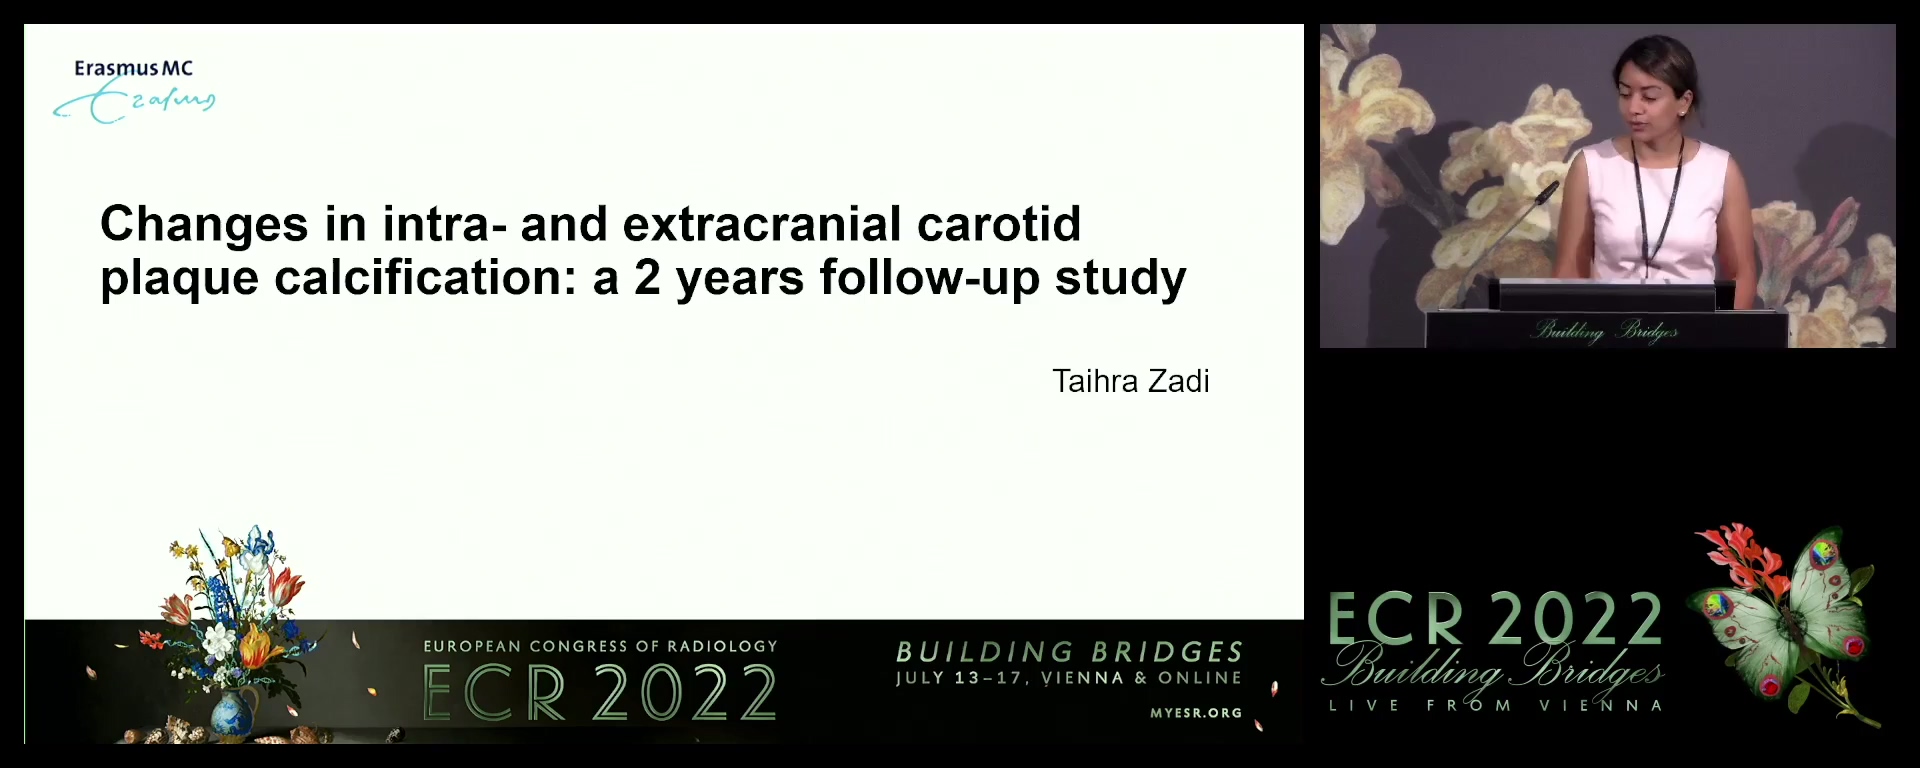 Changes in intra- and extracranial carotid plaque calcification: a 2 years follow-up study - Taihra Zadi, Rotterdam / NL